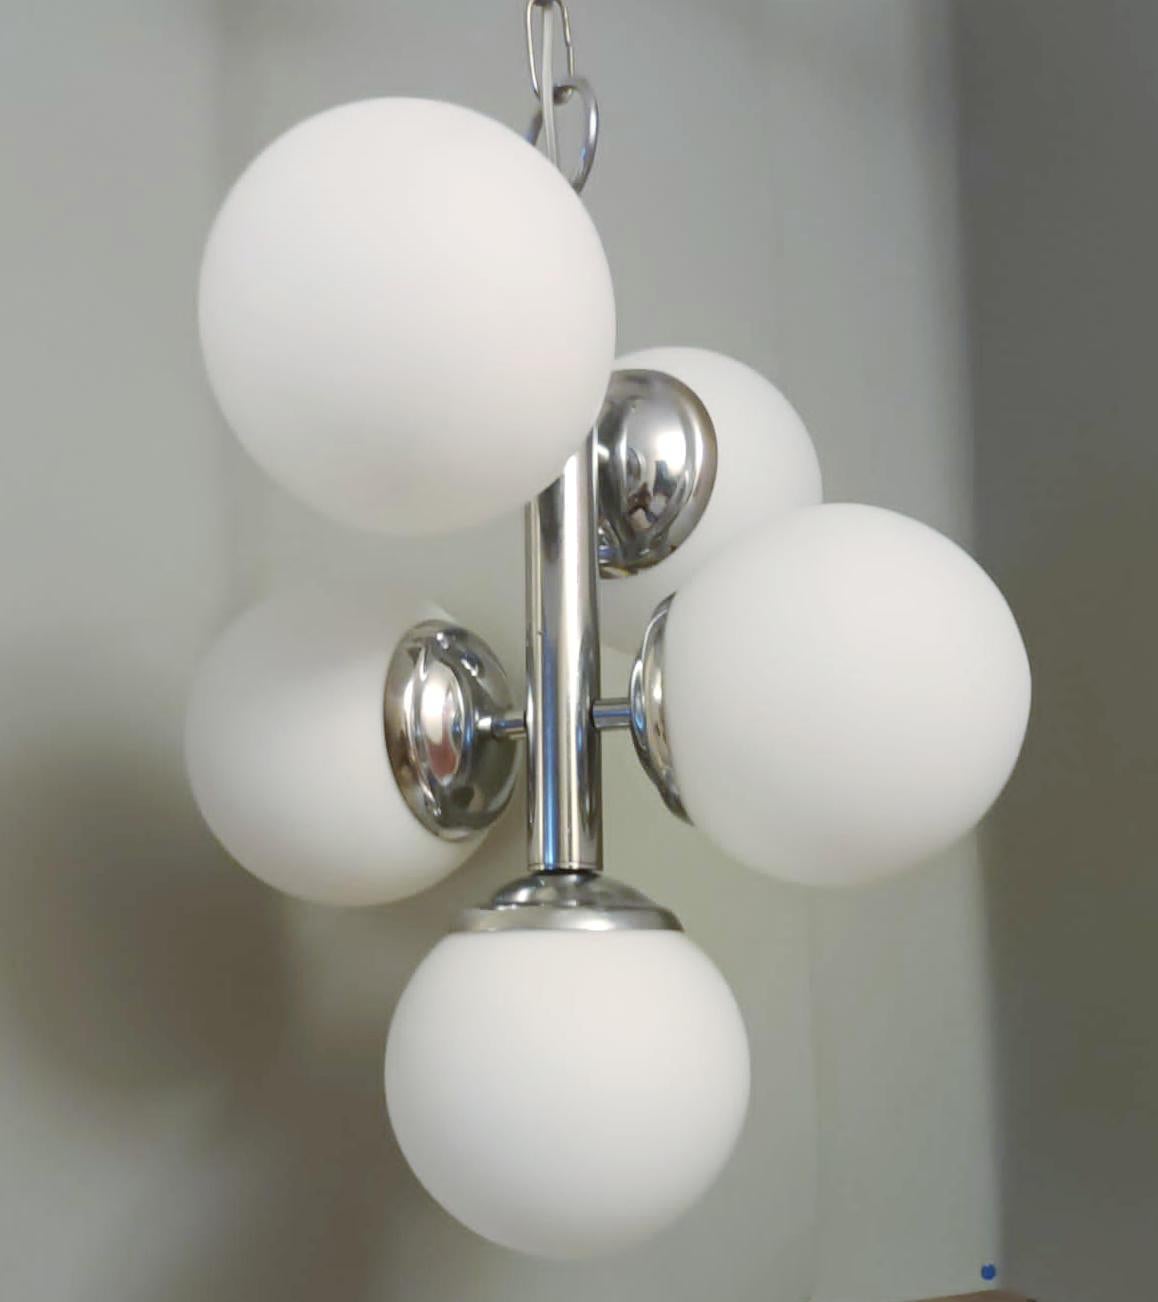 Vintage Italian chandelier with a cluster of five matte white opaline glass globes mounted on chrome structure / Made in Italy circa 1960s
Measures: diameter 14 inches, height 18 inches, total height 30 inches including chain and canopy
5 lights /